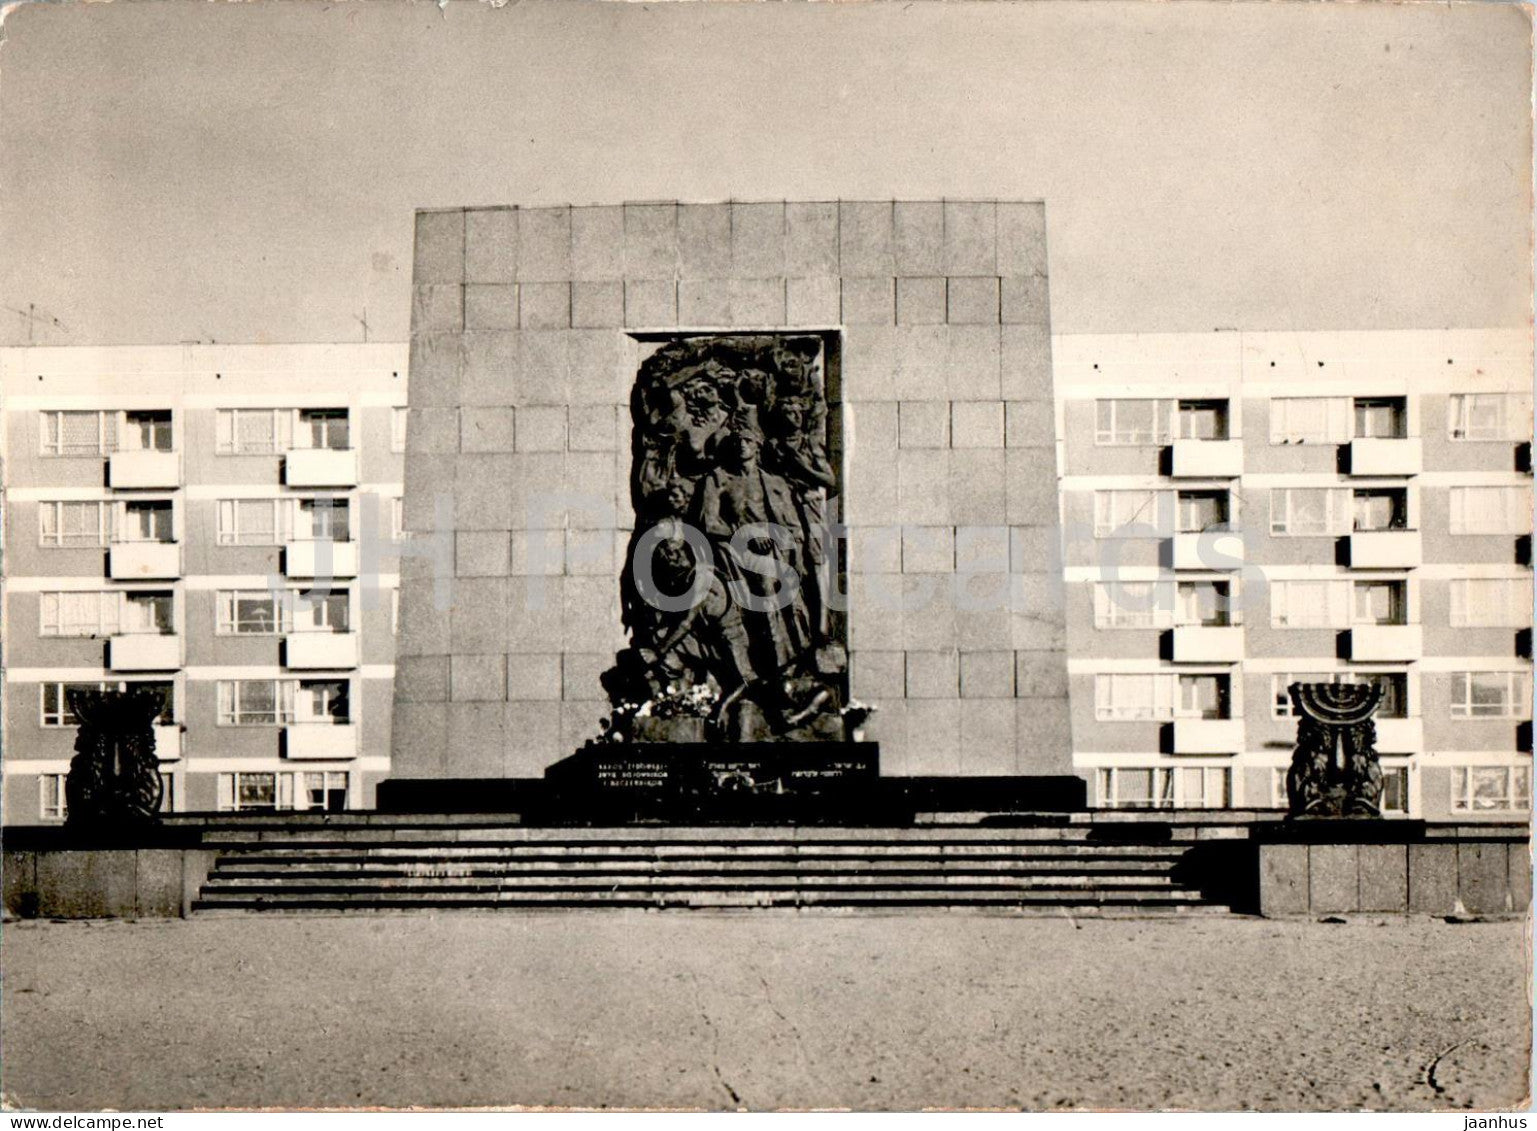 Warszawa - Monument to the Heroes of the Ghetto by Natan Rappaport - Poland - unused - JH Postcards